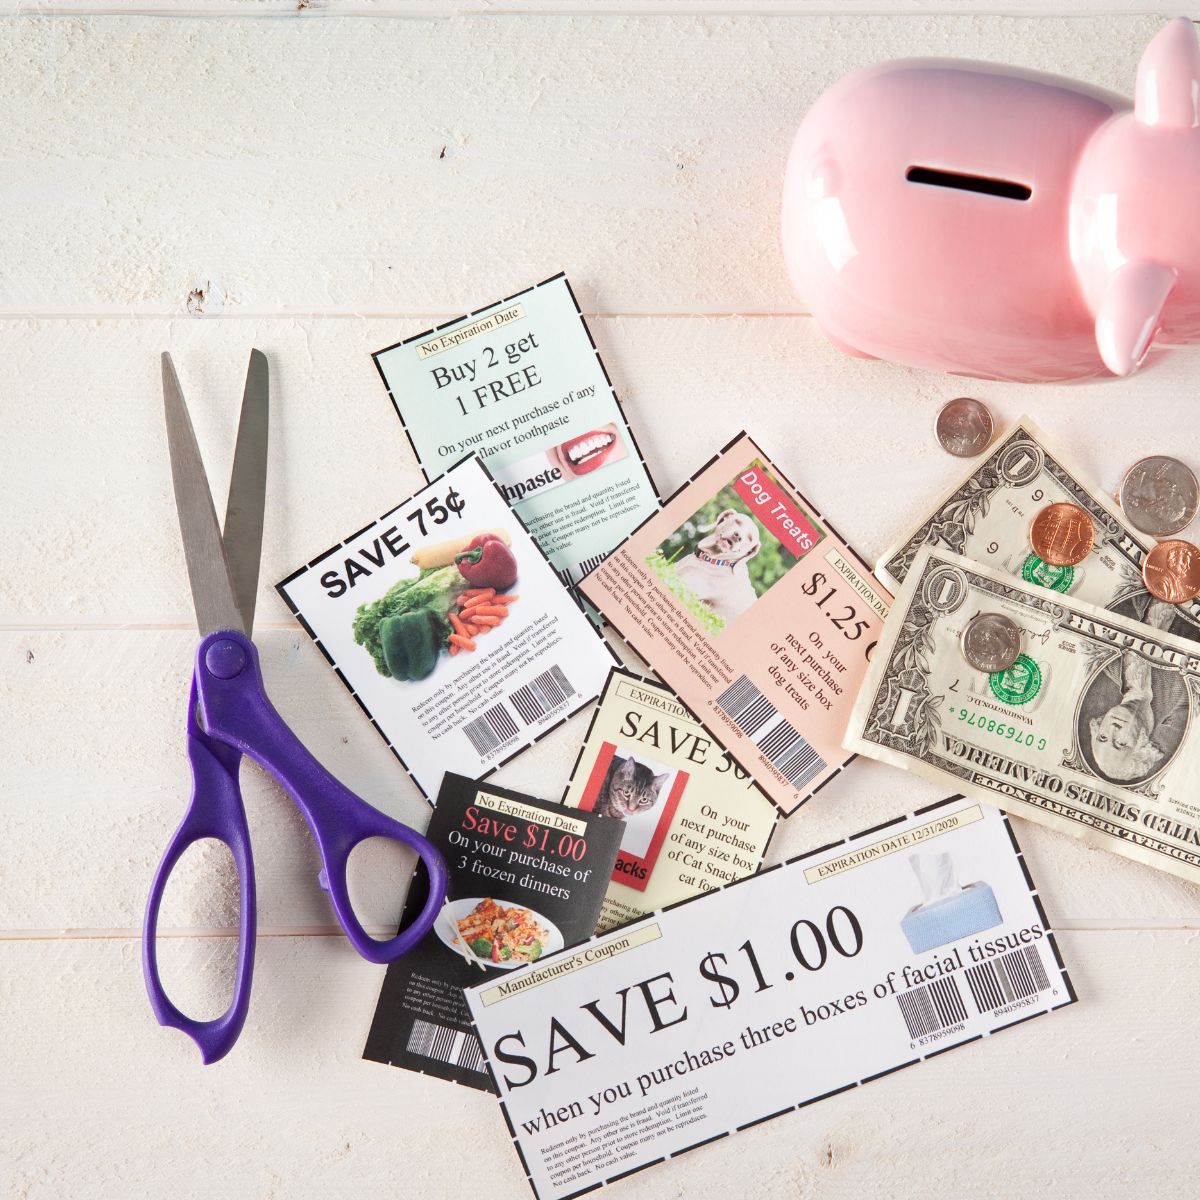 85 Amazing Frugal Tips To Help Save Money